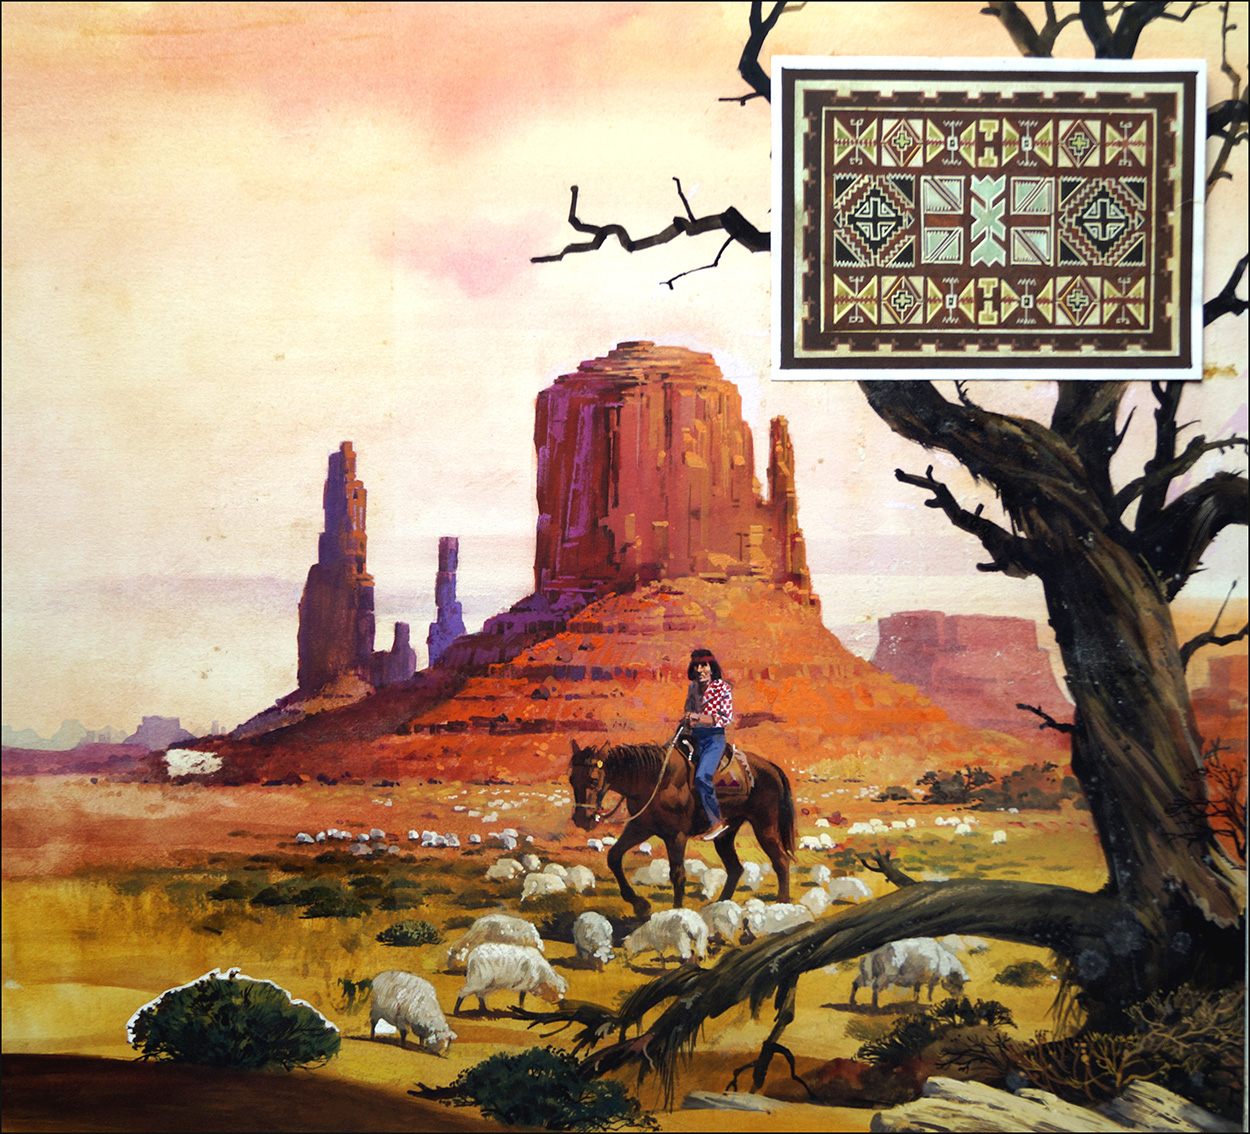 Home for the Navajo (Original) art by Andrew Howat Art at The Illustration Art Gallery